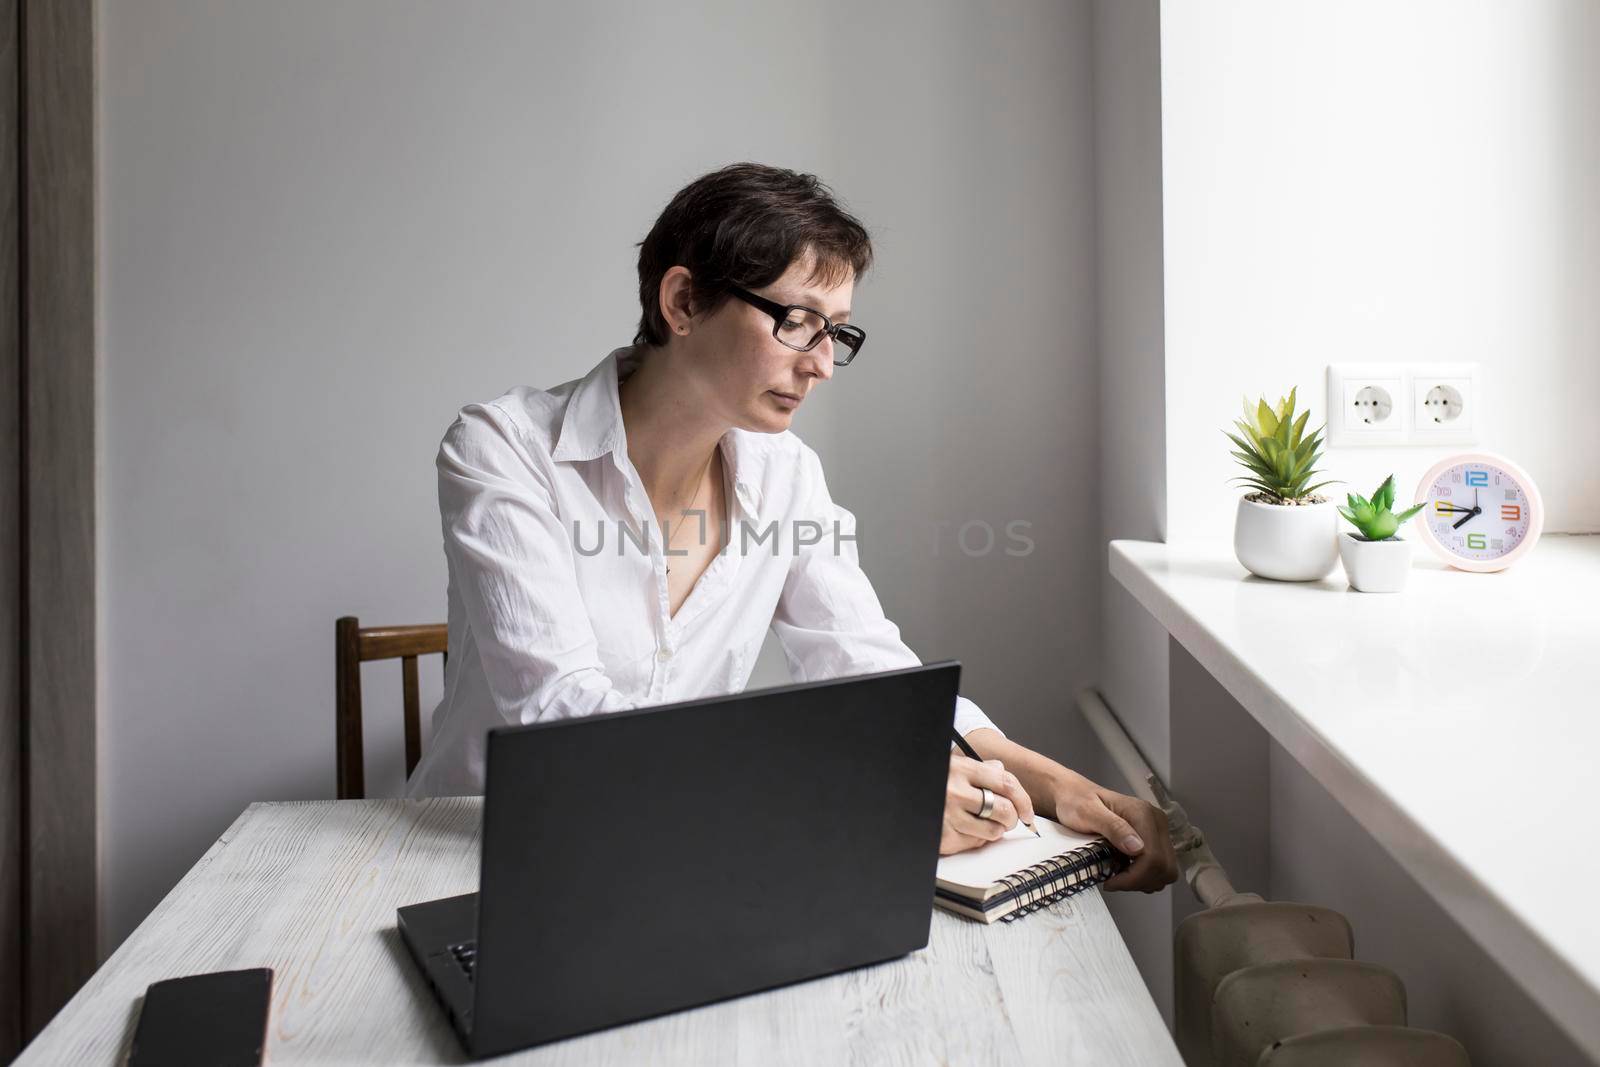 Middle-aged woman with short-haired brunette in glasses works at a laptop near window. She writes thoughtfully in a notebook